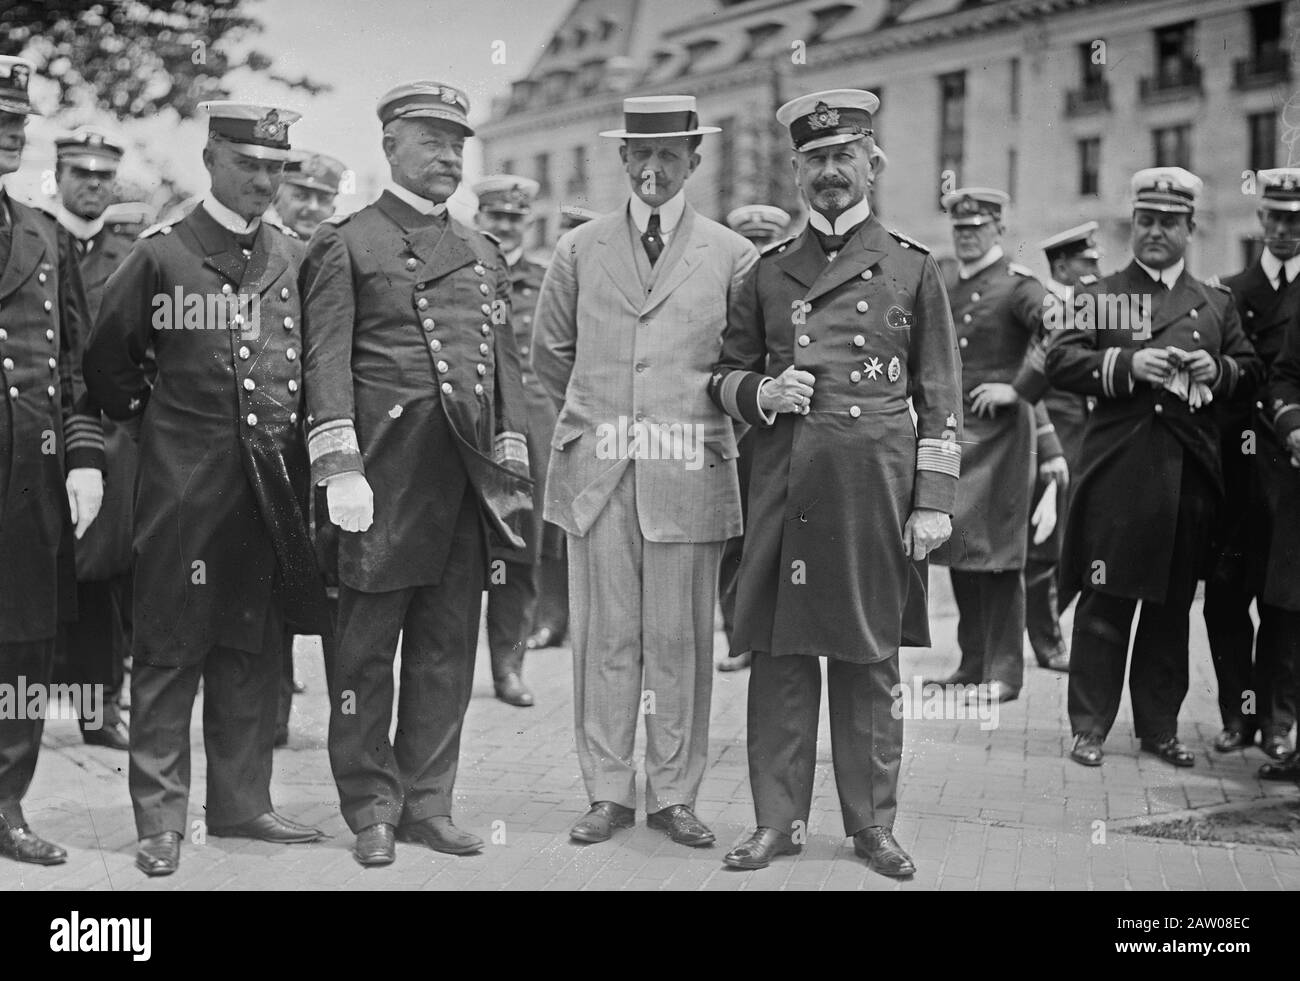 Photo shows (left to right): unidentified man, Captain Ludwig Ritter von Mann of the German ship Moltke; US Rear-Admiral Aaron Ward (1851-1918), Acting Commander of the American Fleet; Count Von Bernstorff, German Ambassador to the United States; and Rear Admiral Hubert von Rebeur-Paschwitz, during the visit of German naval ships to New York City in June, 1912 Stock Photo